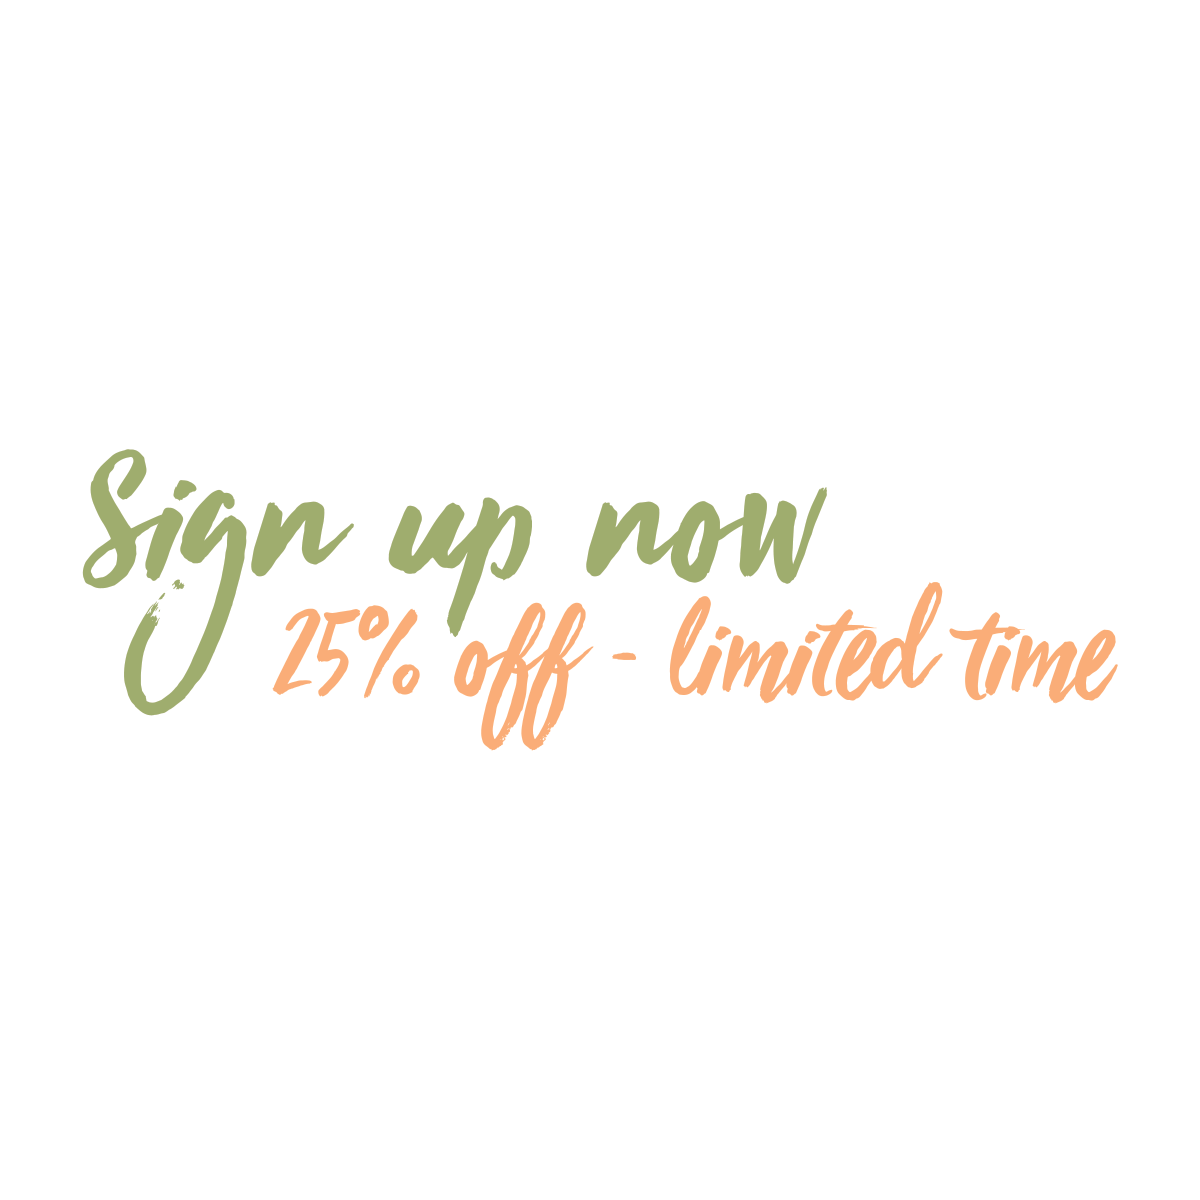 Green Alert: Sign Up Now For 25% Off Limited Time Offer